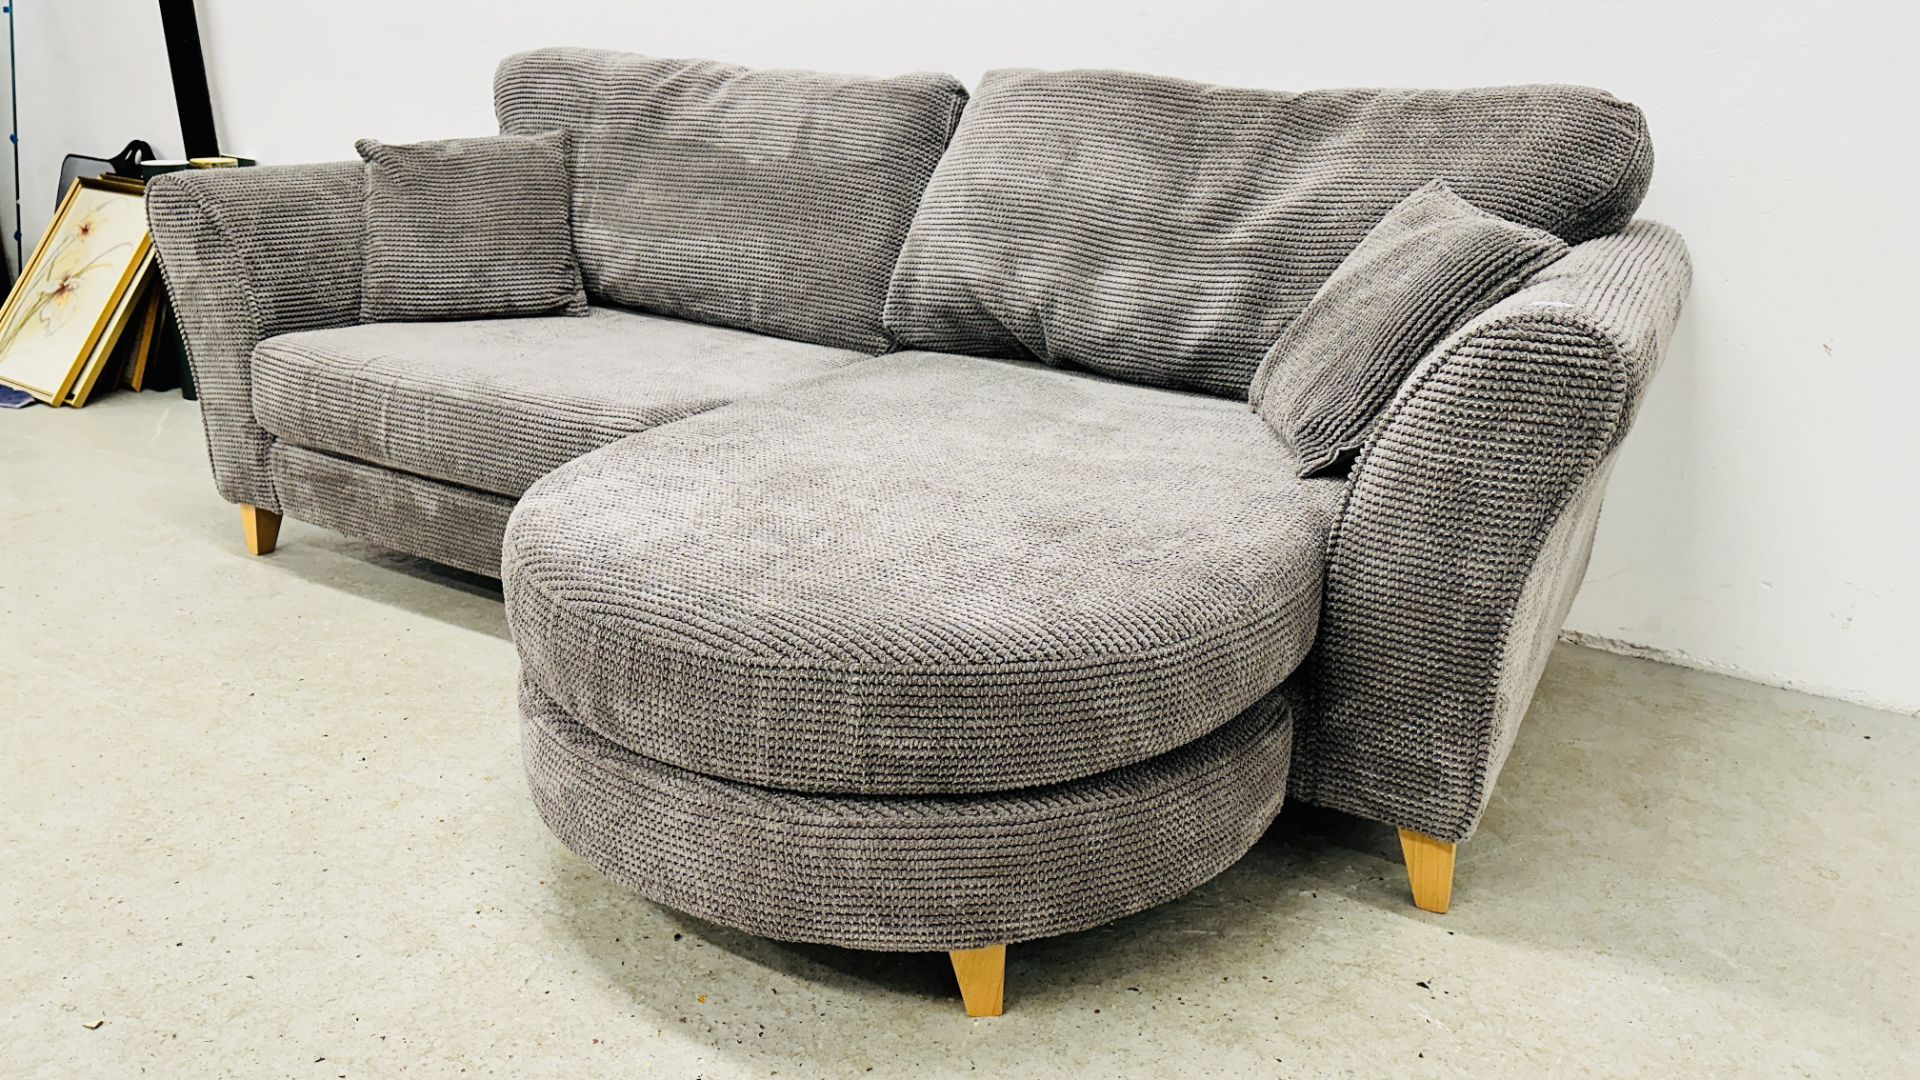 GOOD QUALITY DFS CORNER SOFA UPHOLSTERED IN CHARCOAL GREY. - Image 8 of 10